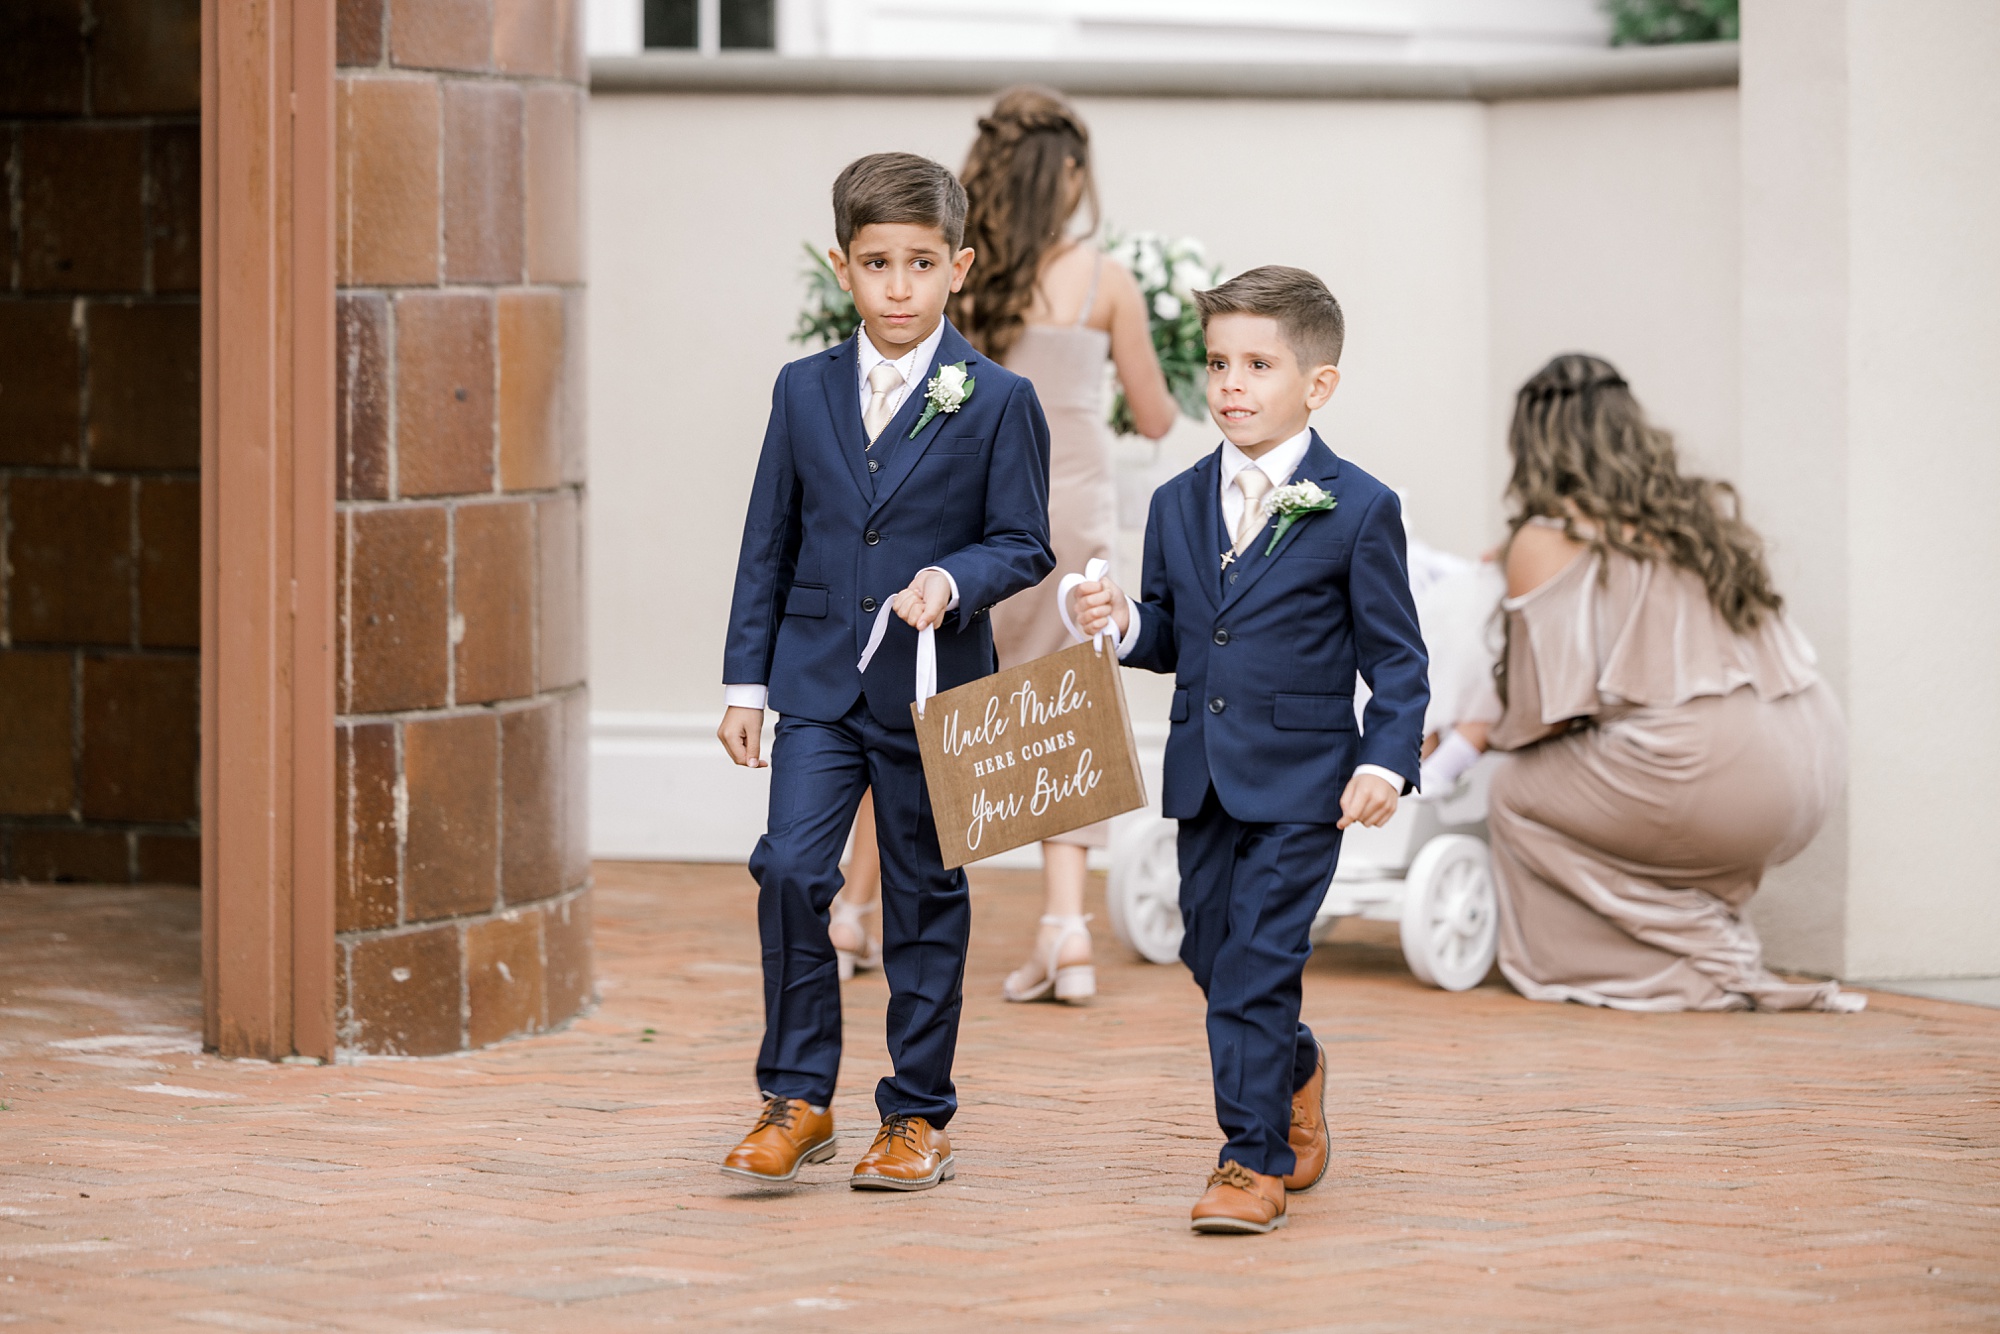 ring bearers carry wooden sign during wedding ceremony at Ryland Inn on the patio